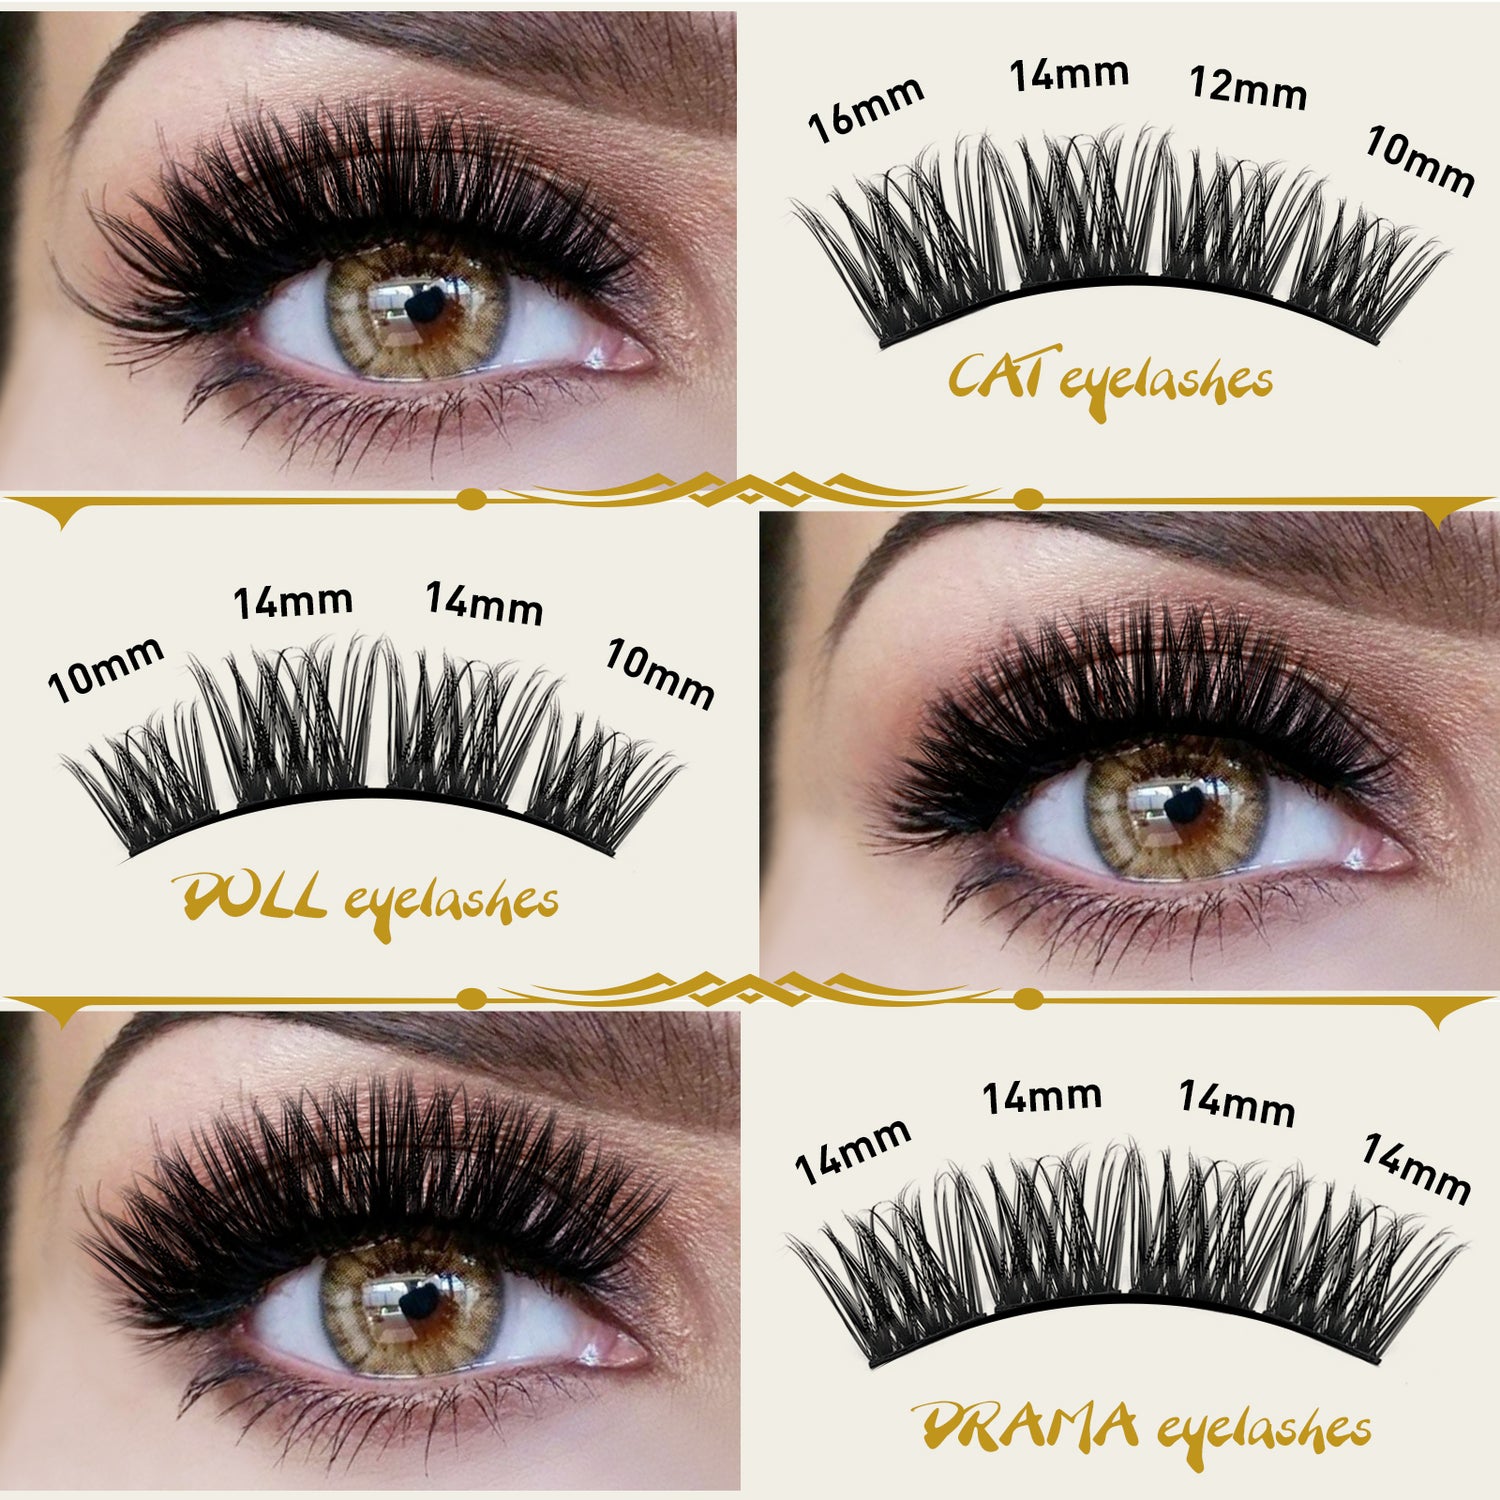 wispy cluster lashes